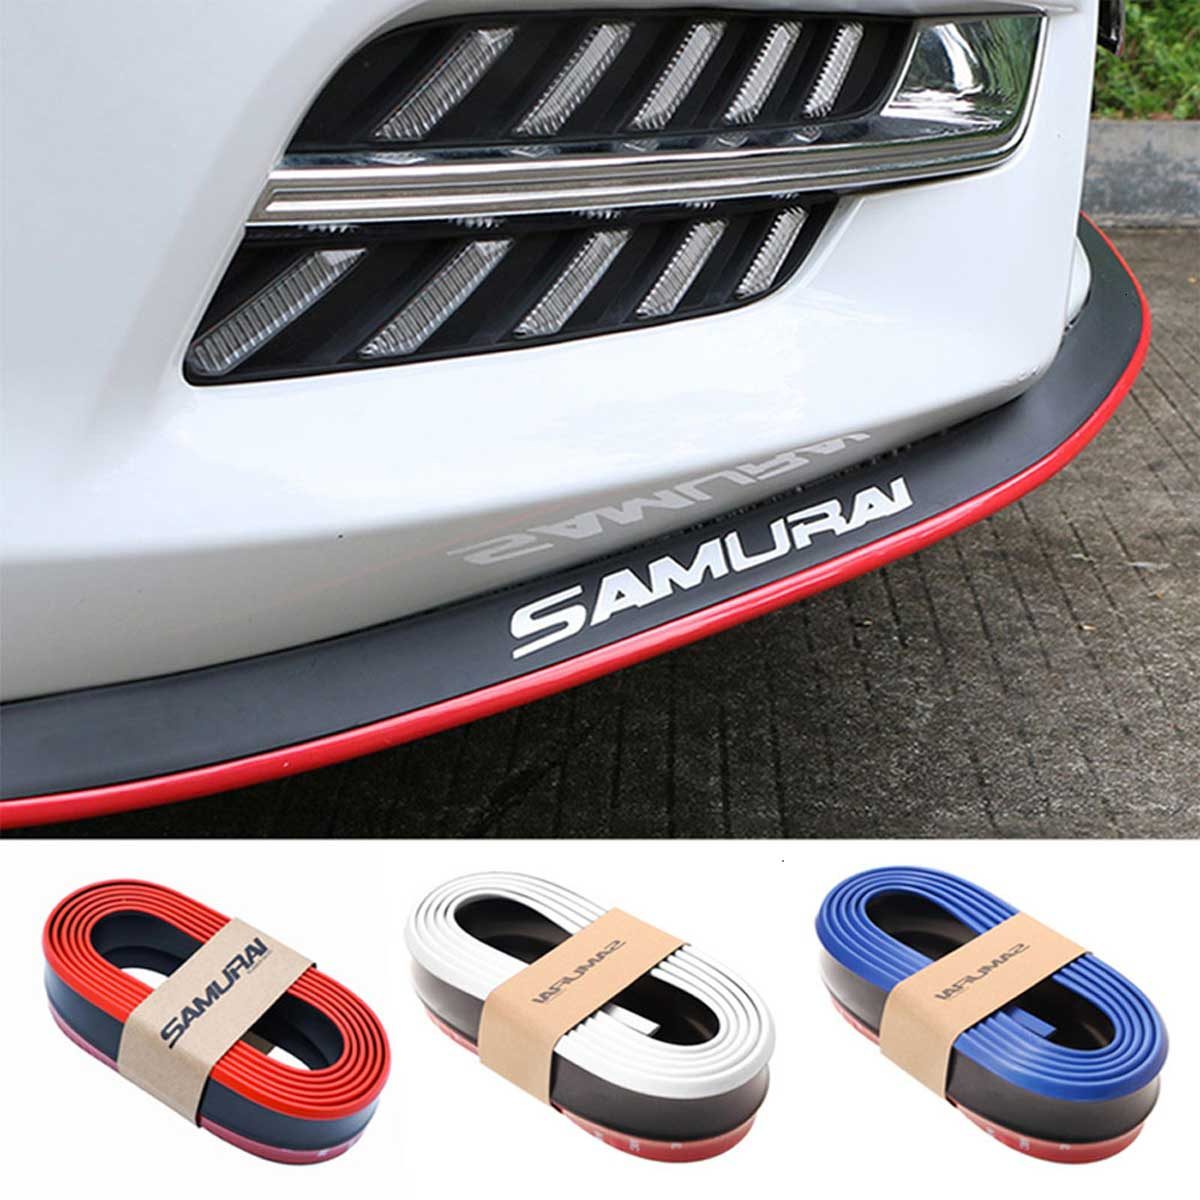 Car Rear Bumper Protector Guard Parking Vehicle Largest Wide